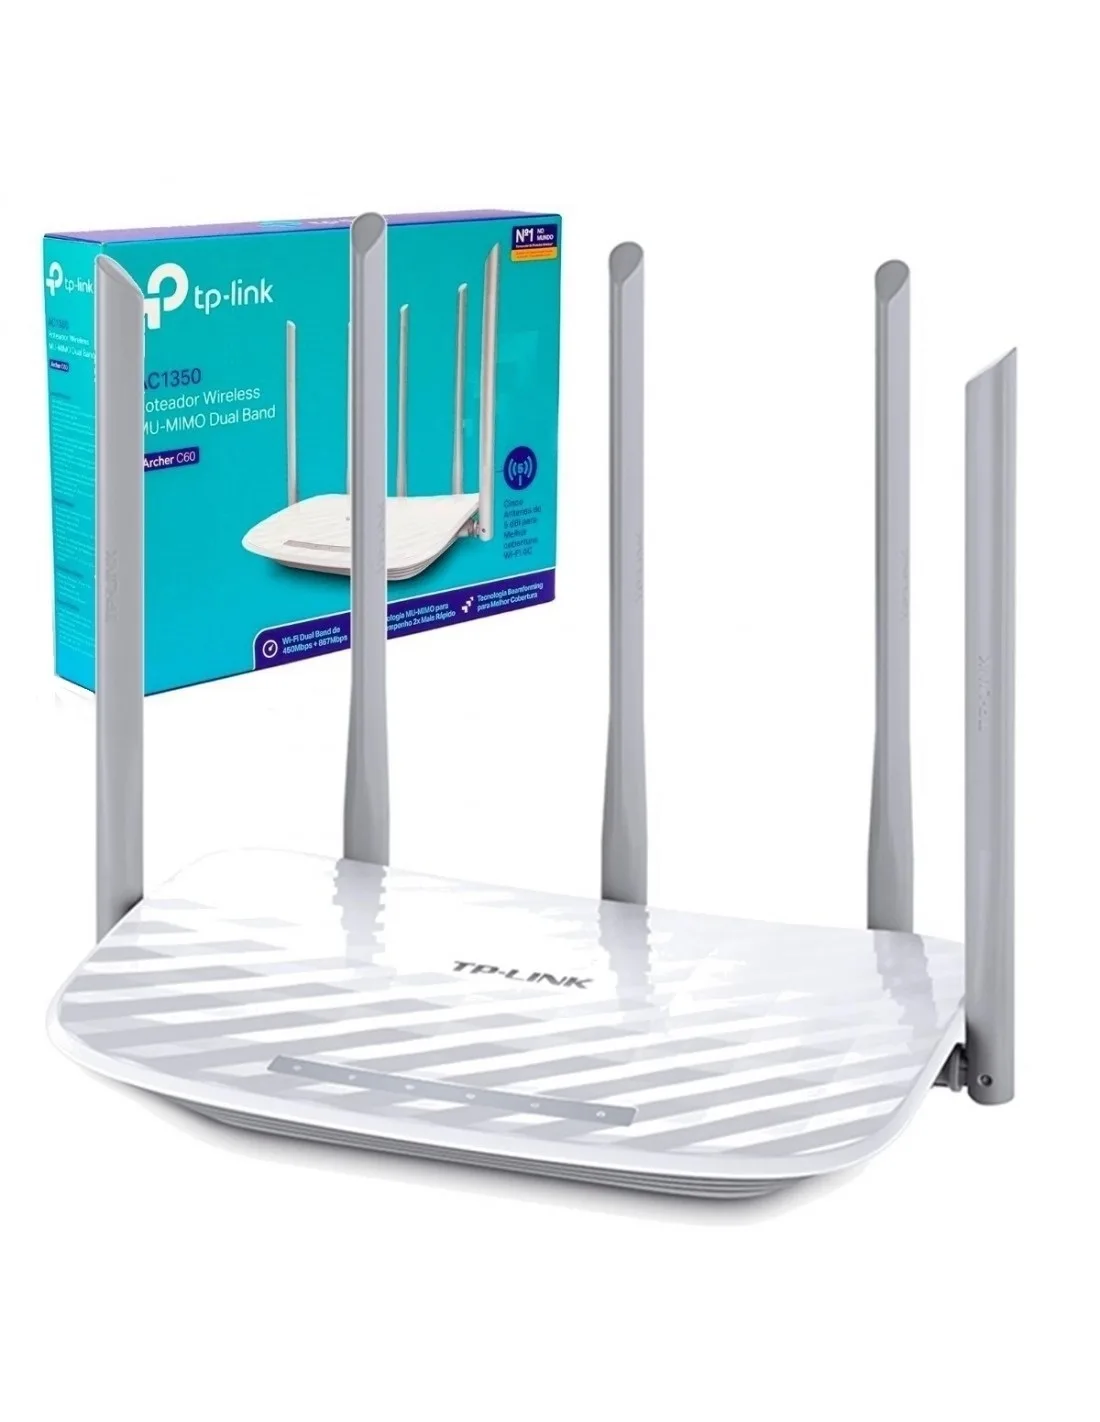 ROUTER WIFI TP-LINK ARCHER C60 AC1350 DUAL BAND